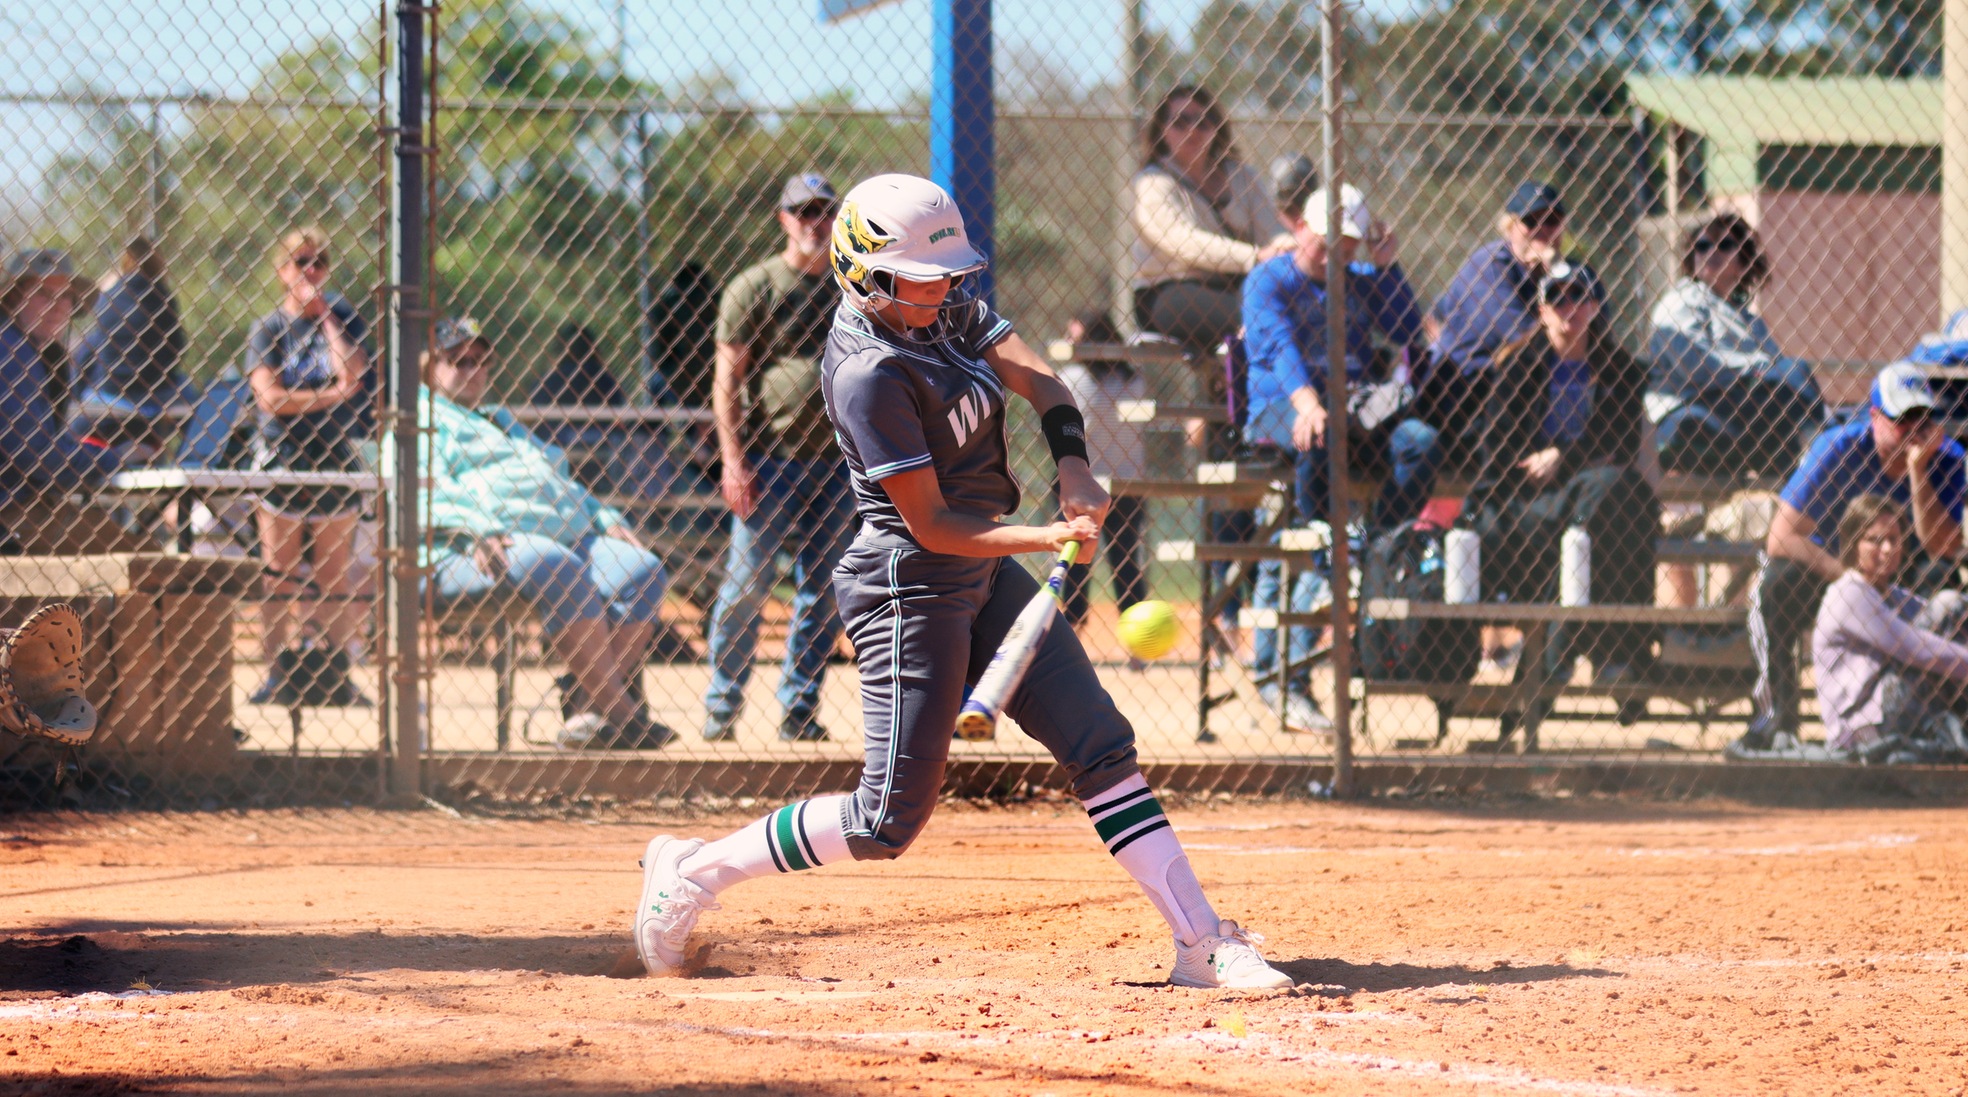 Copyright 2020. Wilmington University. All rights reserved. Photo by Mary Kate Rumbaugh. March 1, 2020 vs. Grand Valley State at Winter Haven Diamond Plex in Winter Haven, Florida. Photo of Sara Miller, who had four hits combined against Western Oregon and GVS.